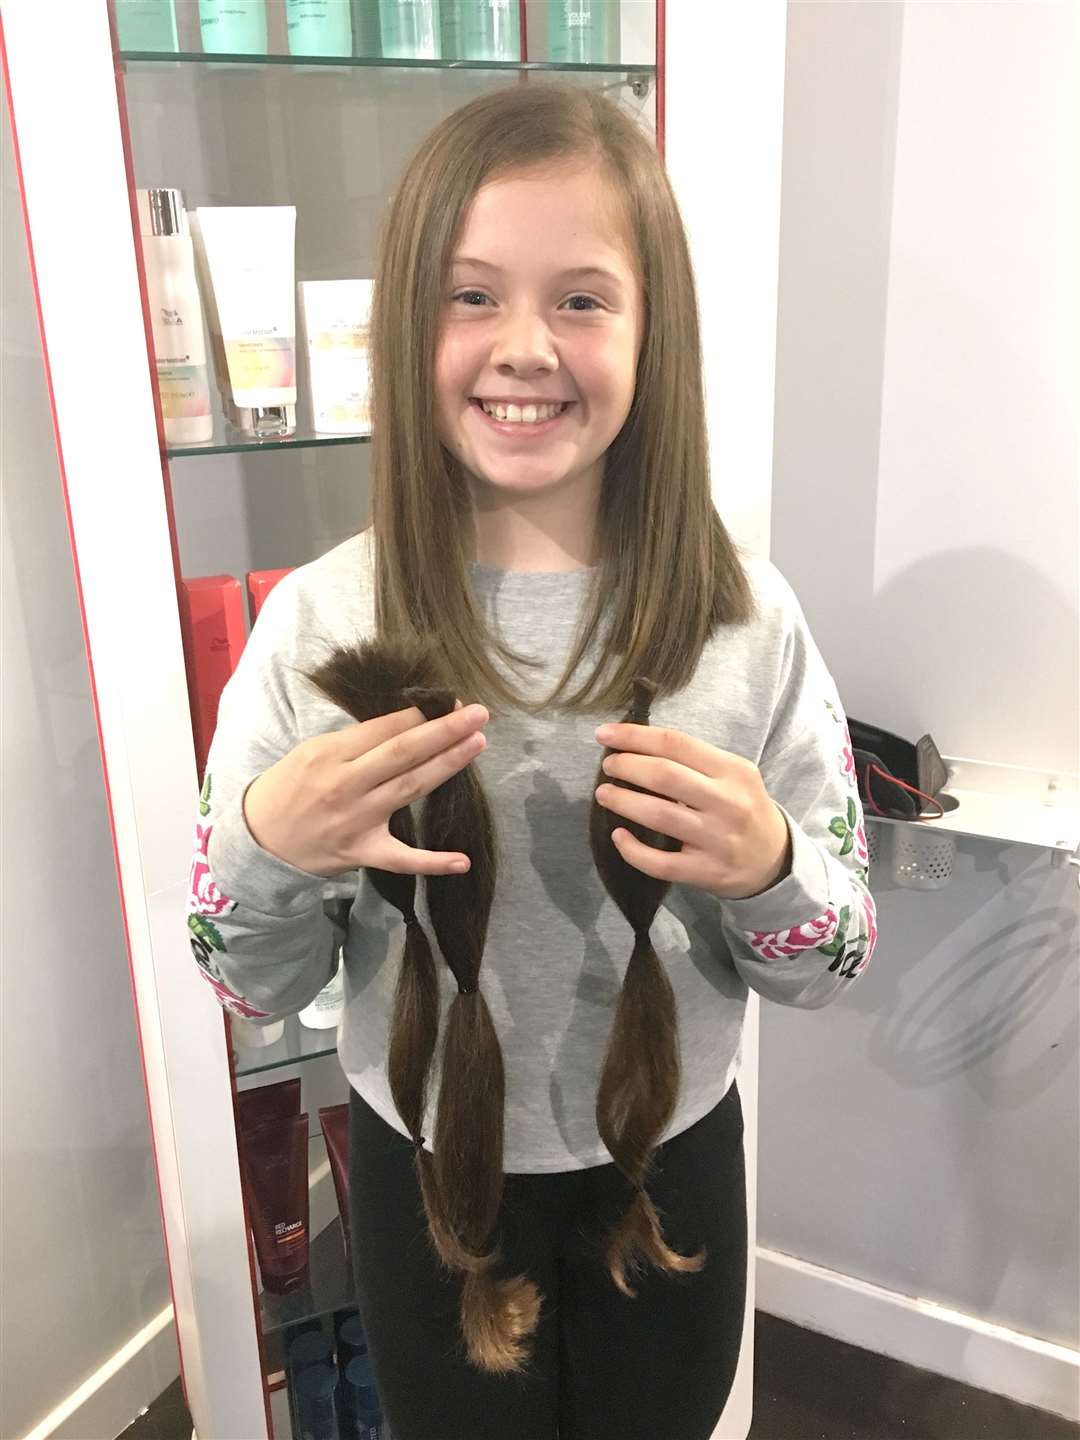 Chloe holds the braids that are ready to be sent away for sick children. Seventeen inches were chopped off.